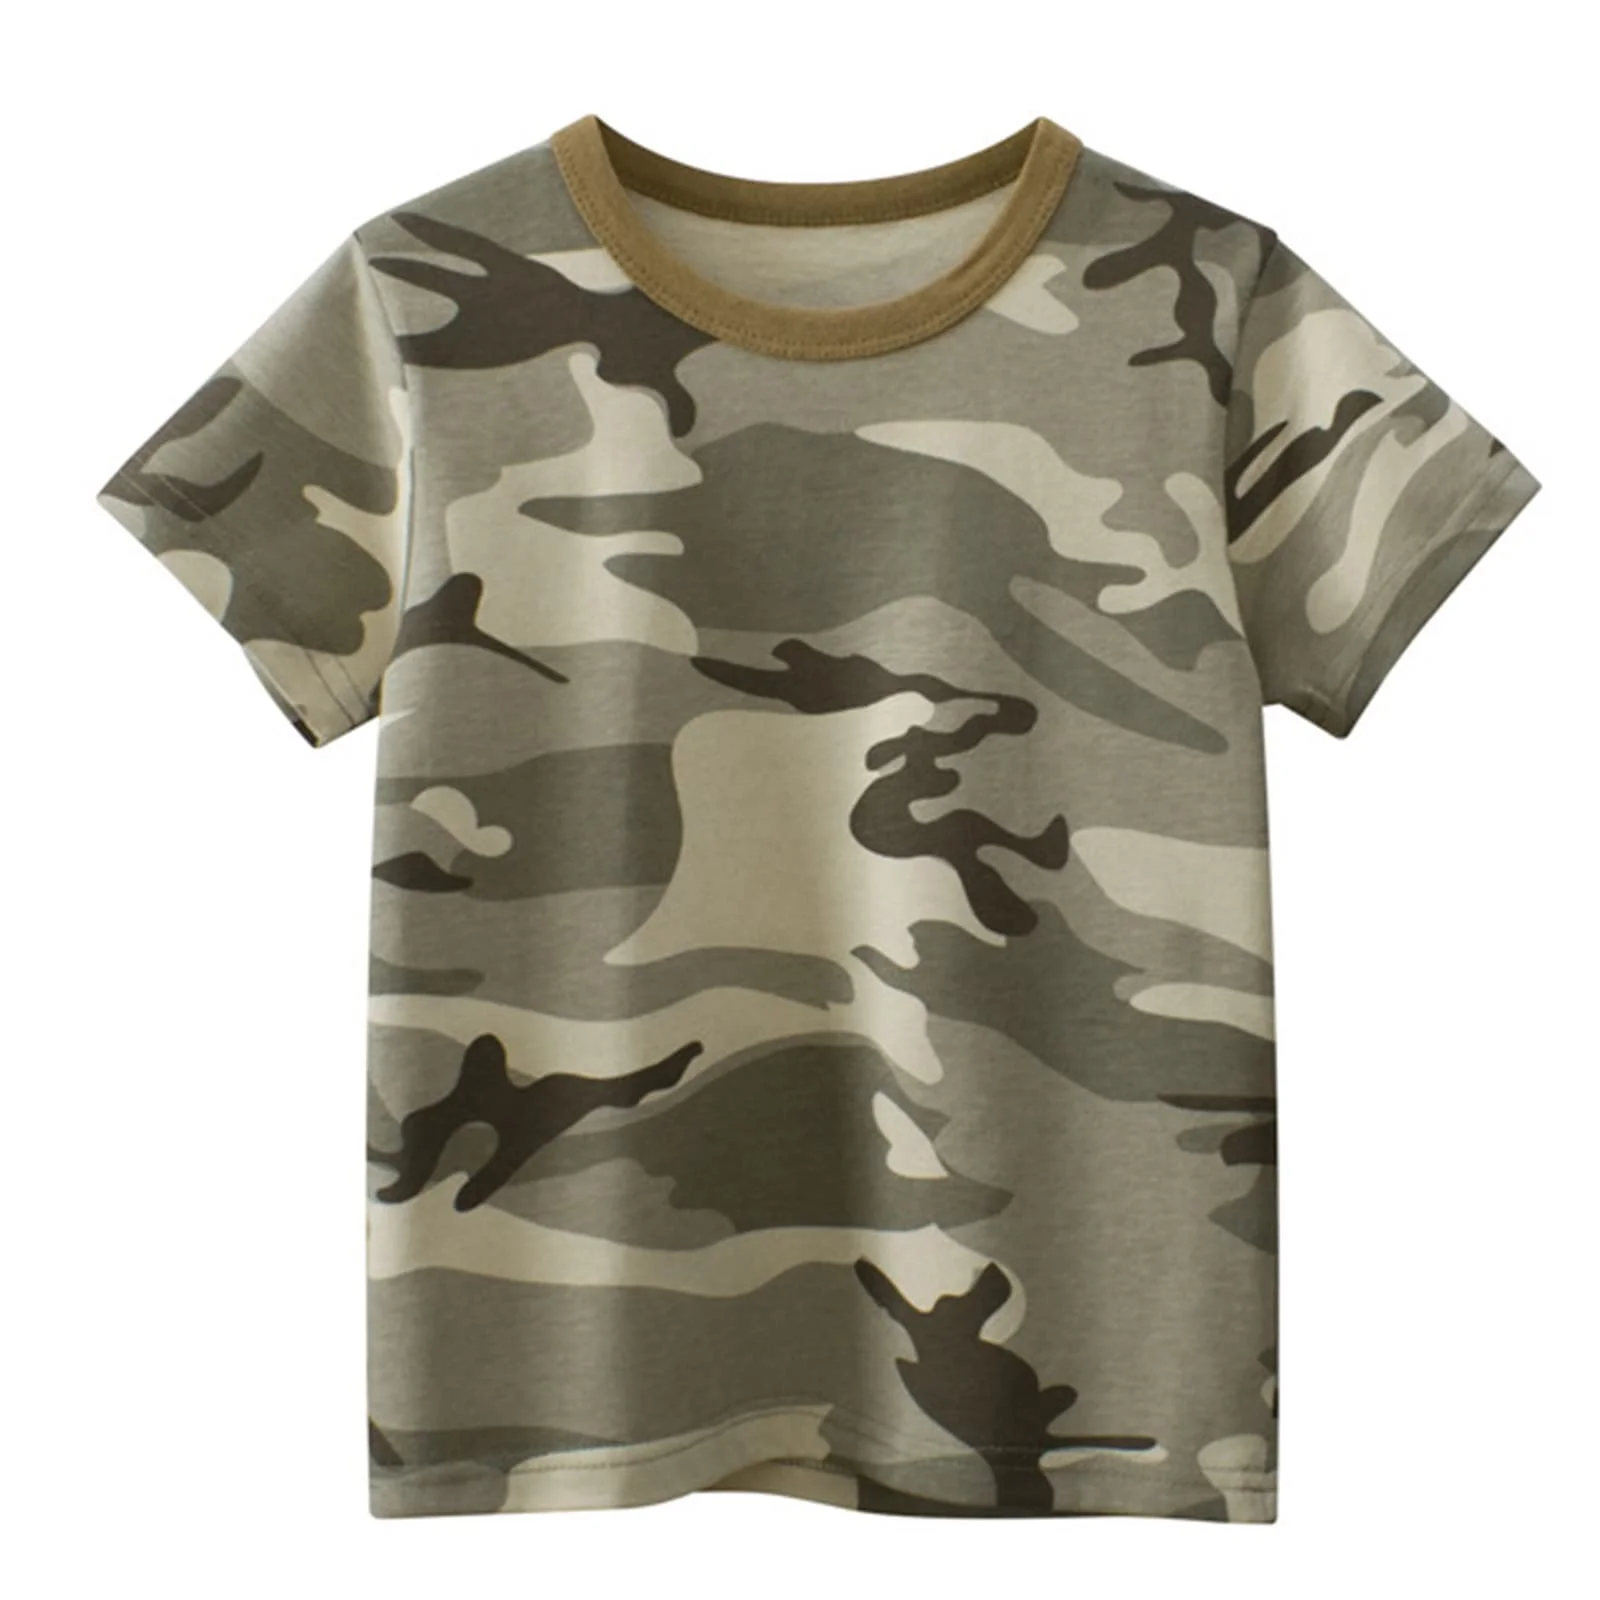 Toddler Kids Baby Boys Girls Striped Camouflage Short Sleeve Crewneck T Shirts Tops Tee Clothes For Childre